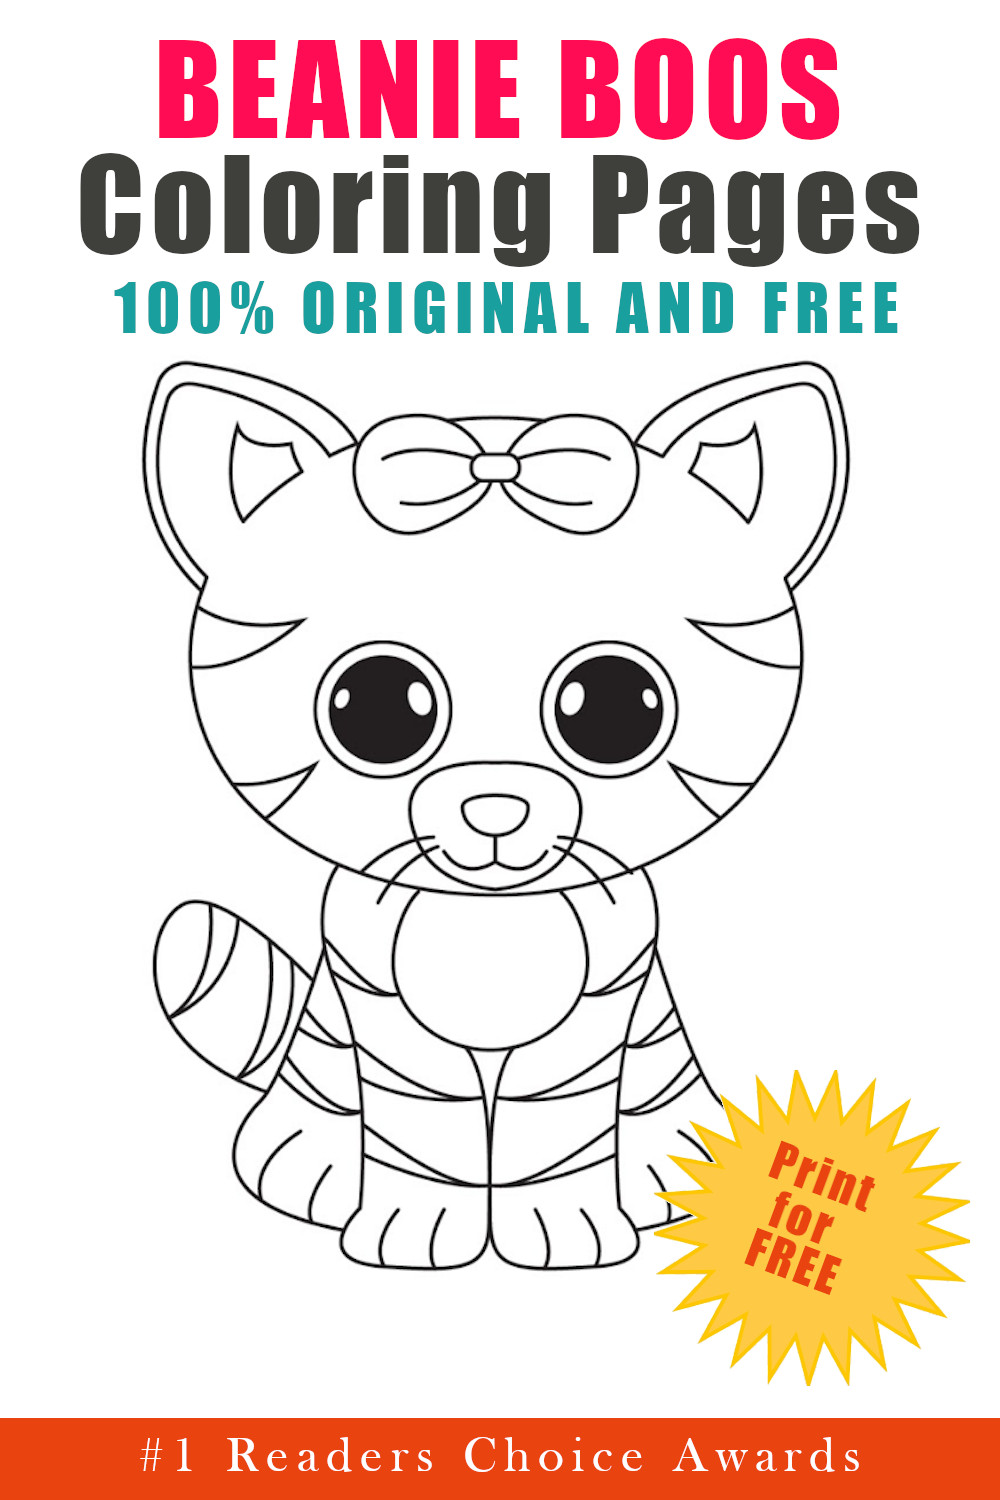 Beanie boos coloring pages free printables